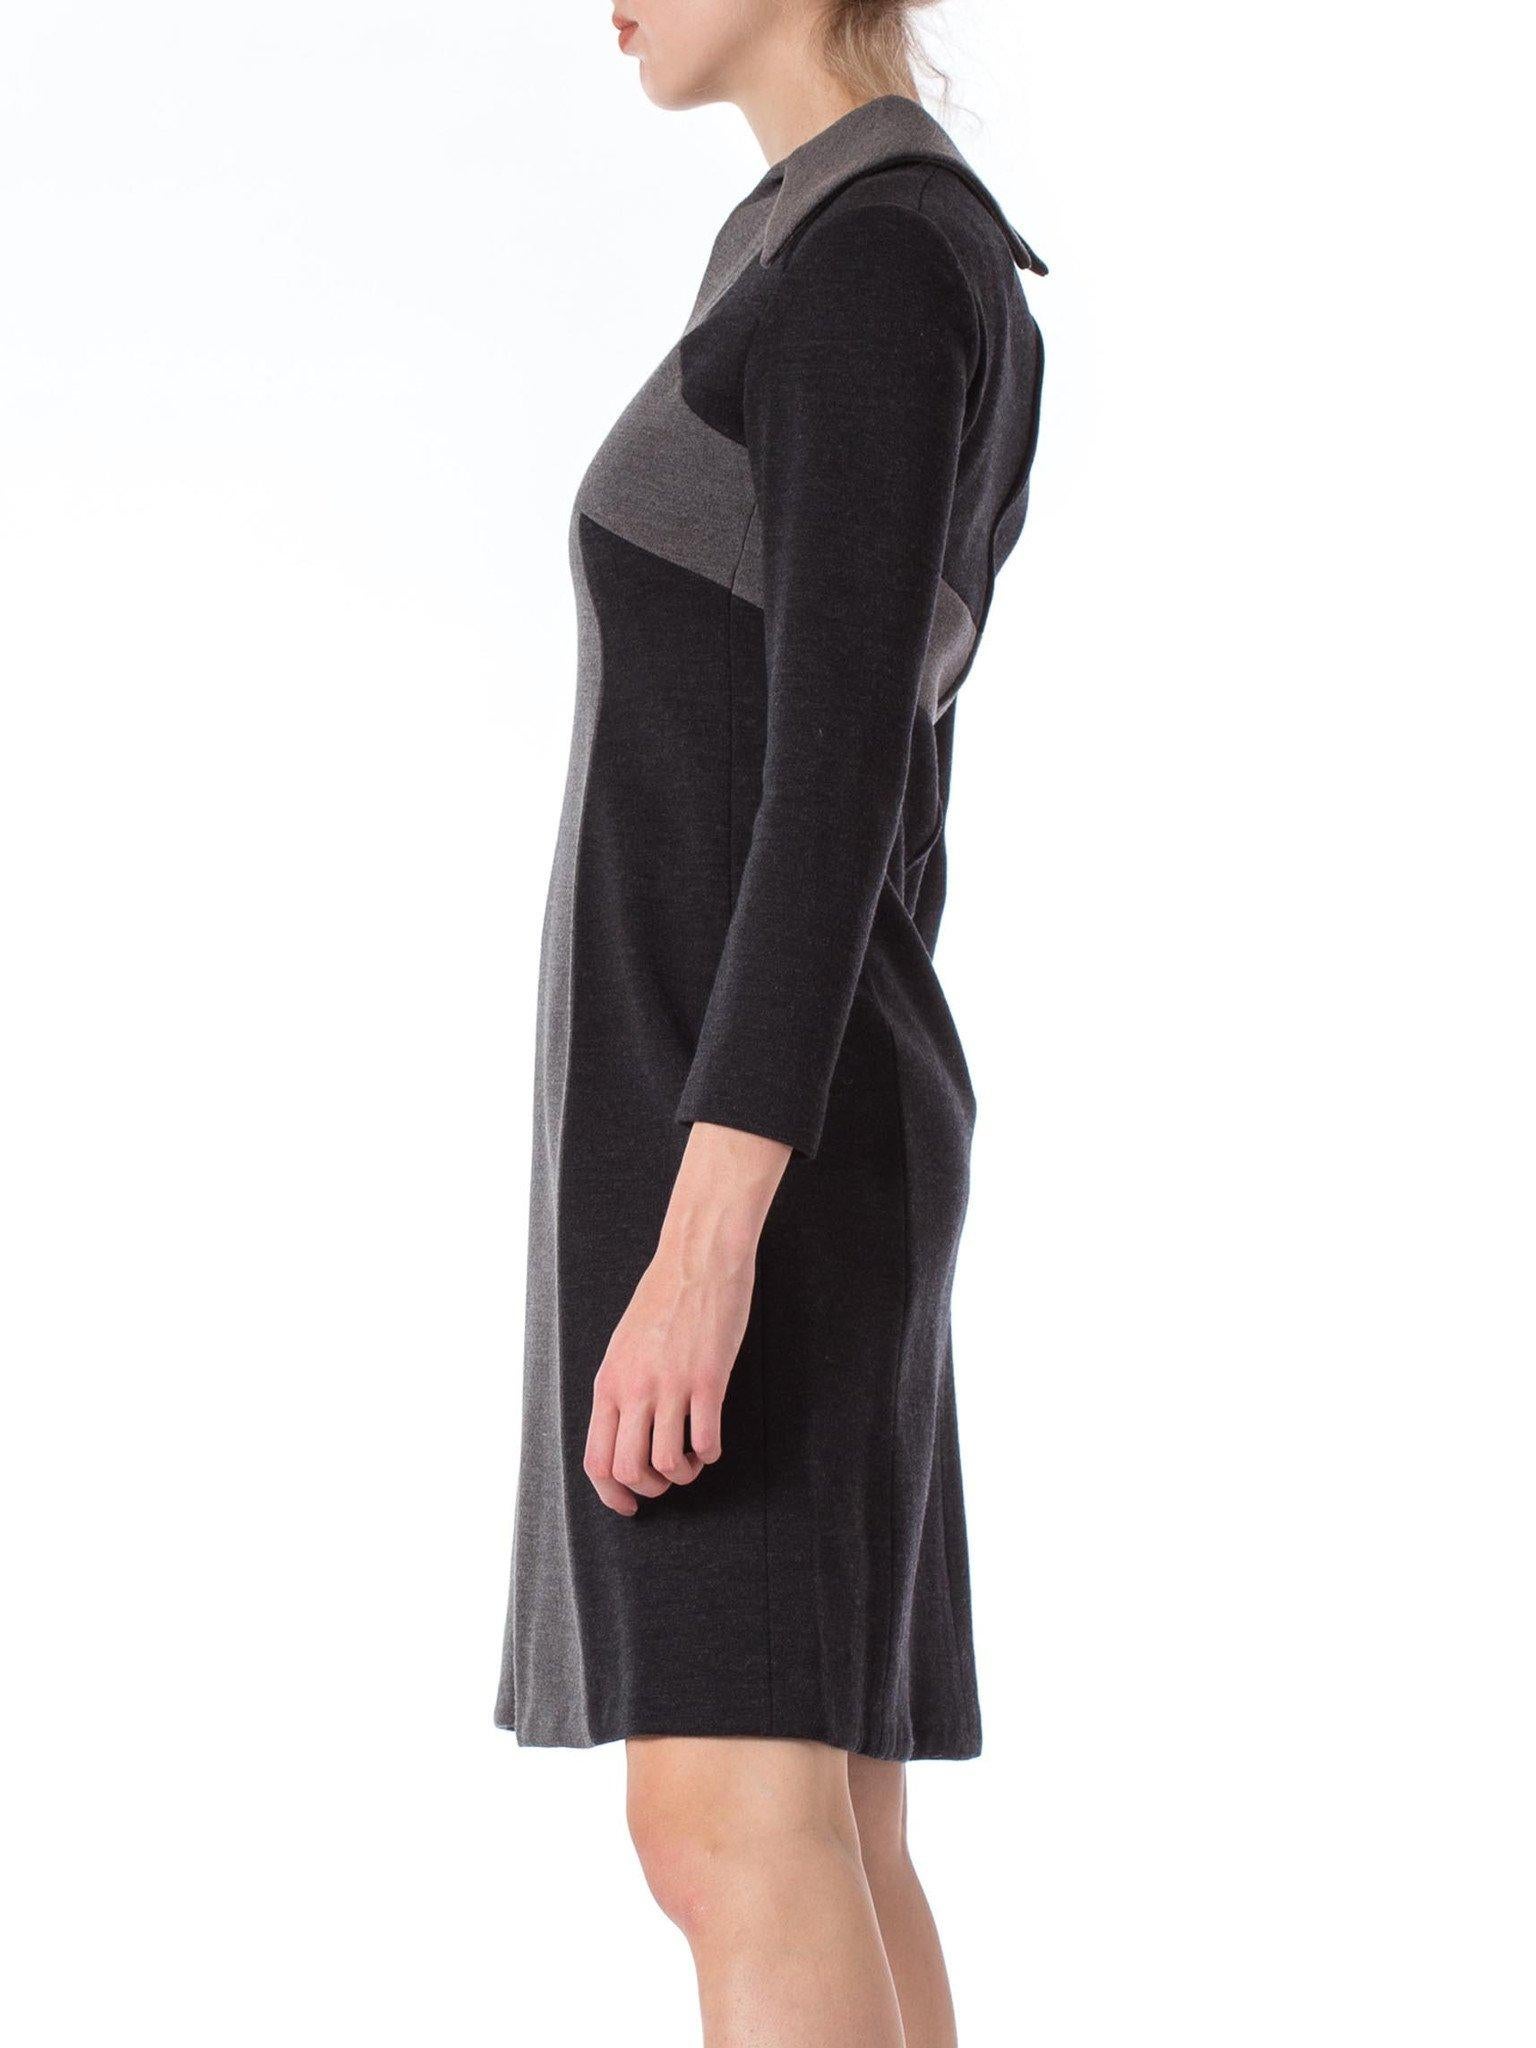 1960S Black & Grey Wool Knit Mod Long Sleeve Dress In Excellent Condition For Sale In New York, NY